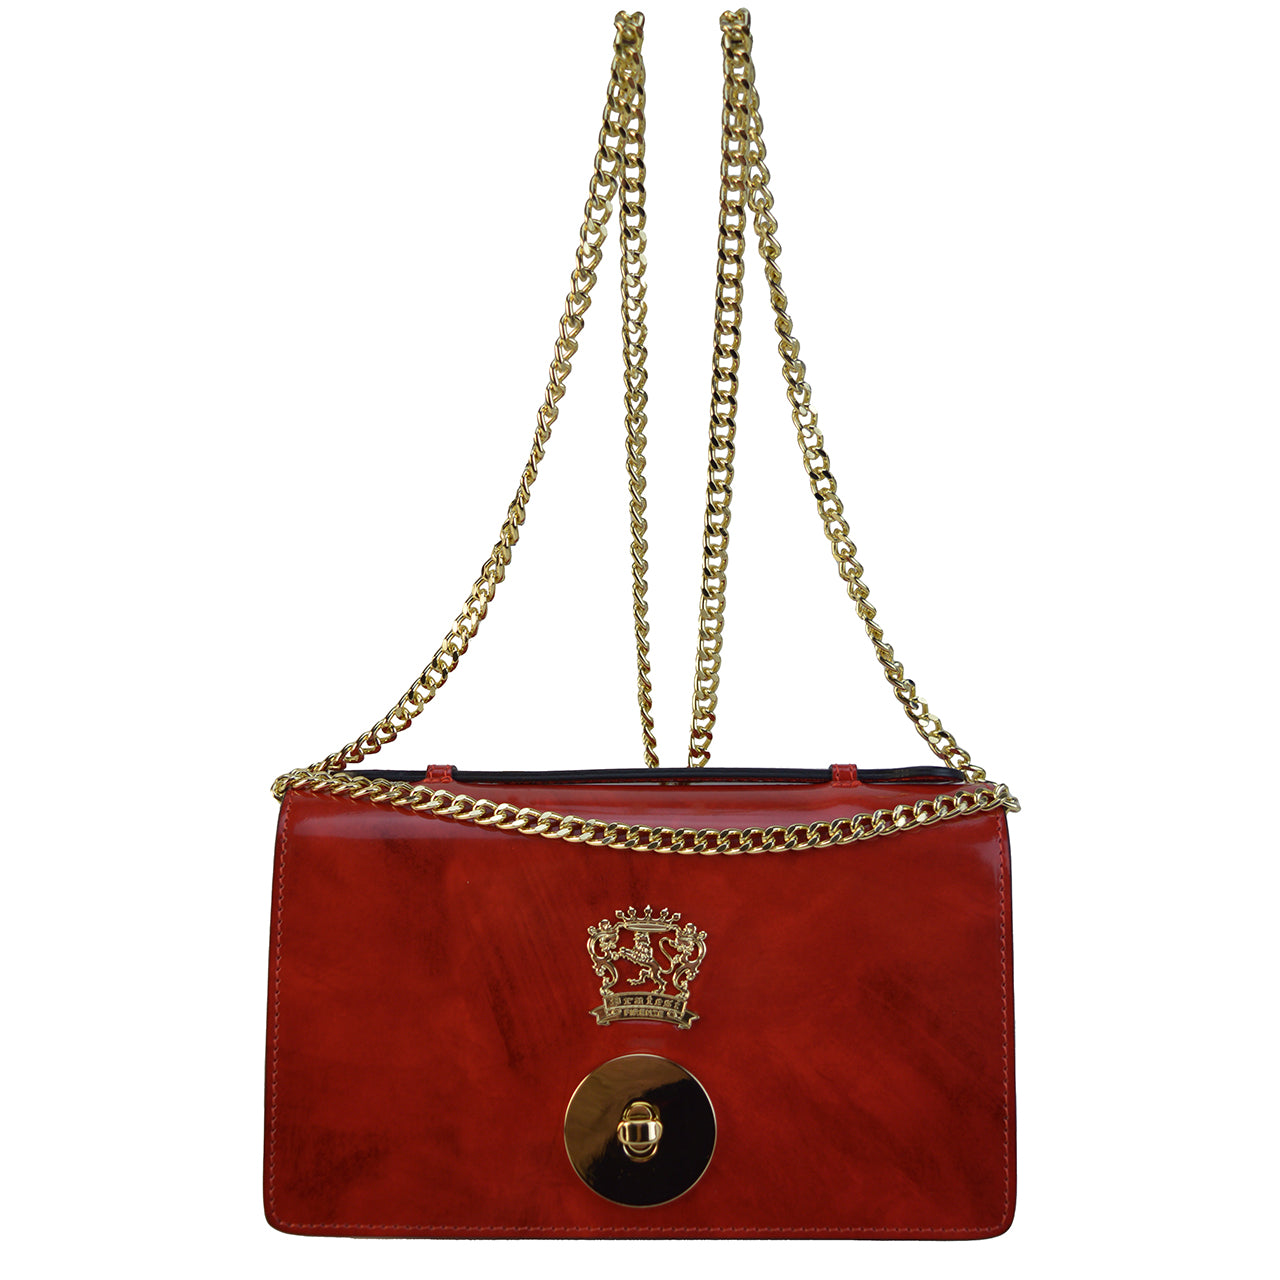 Pratesi Le Falle R194 Lady bag with chain shoulder